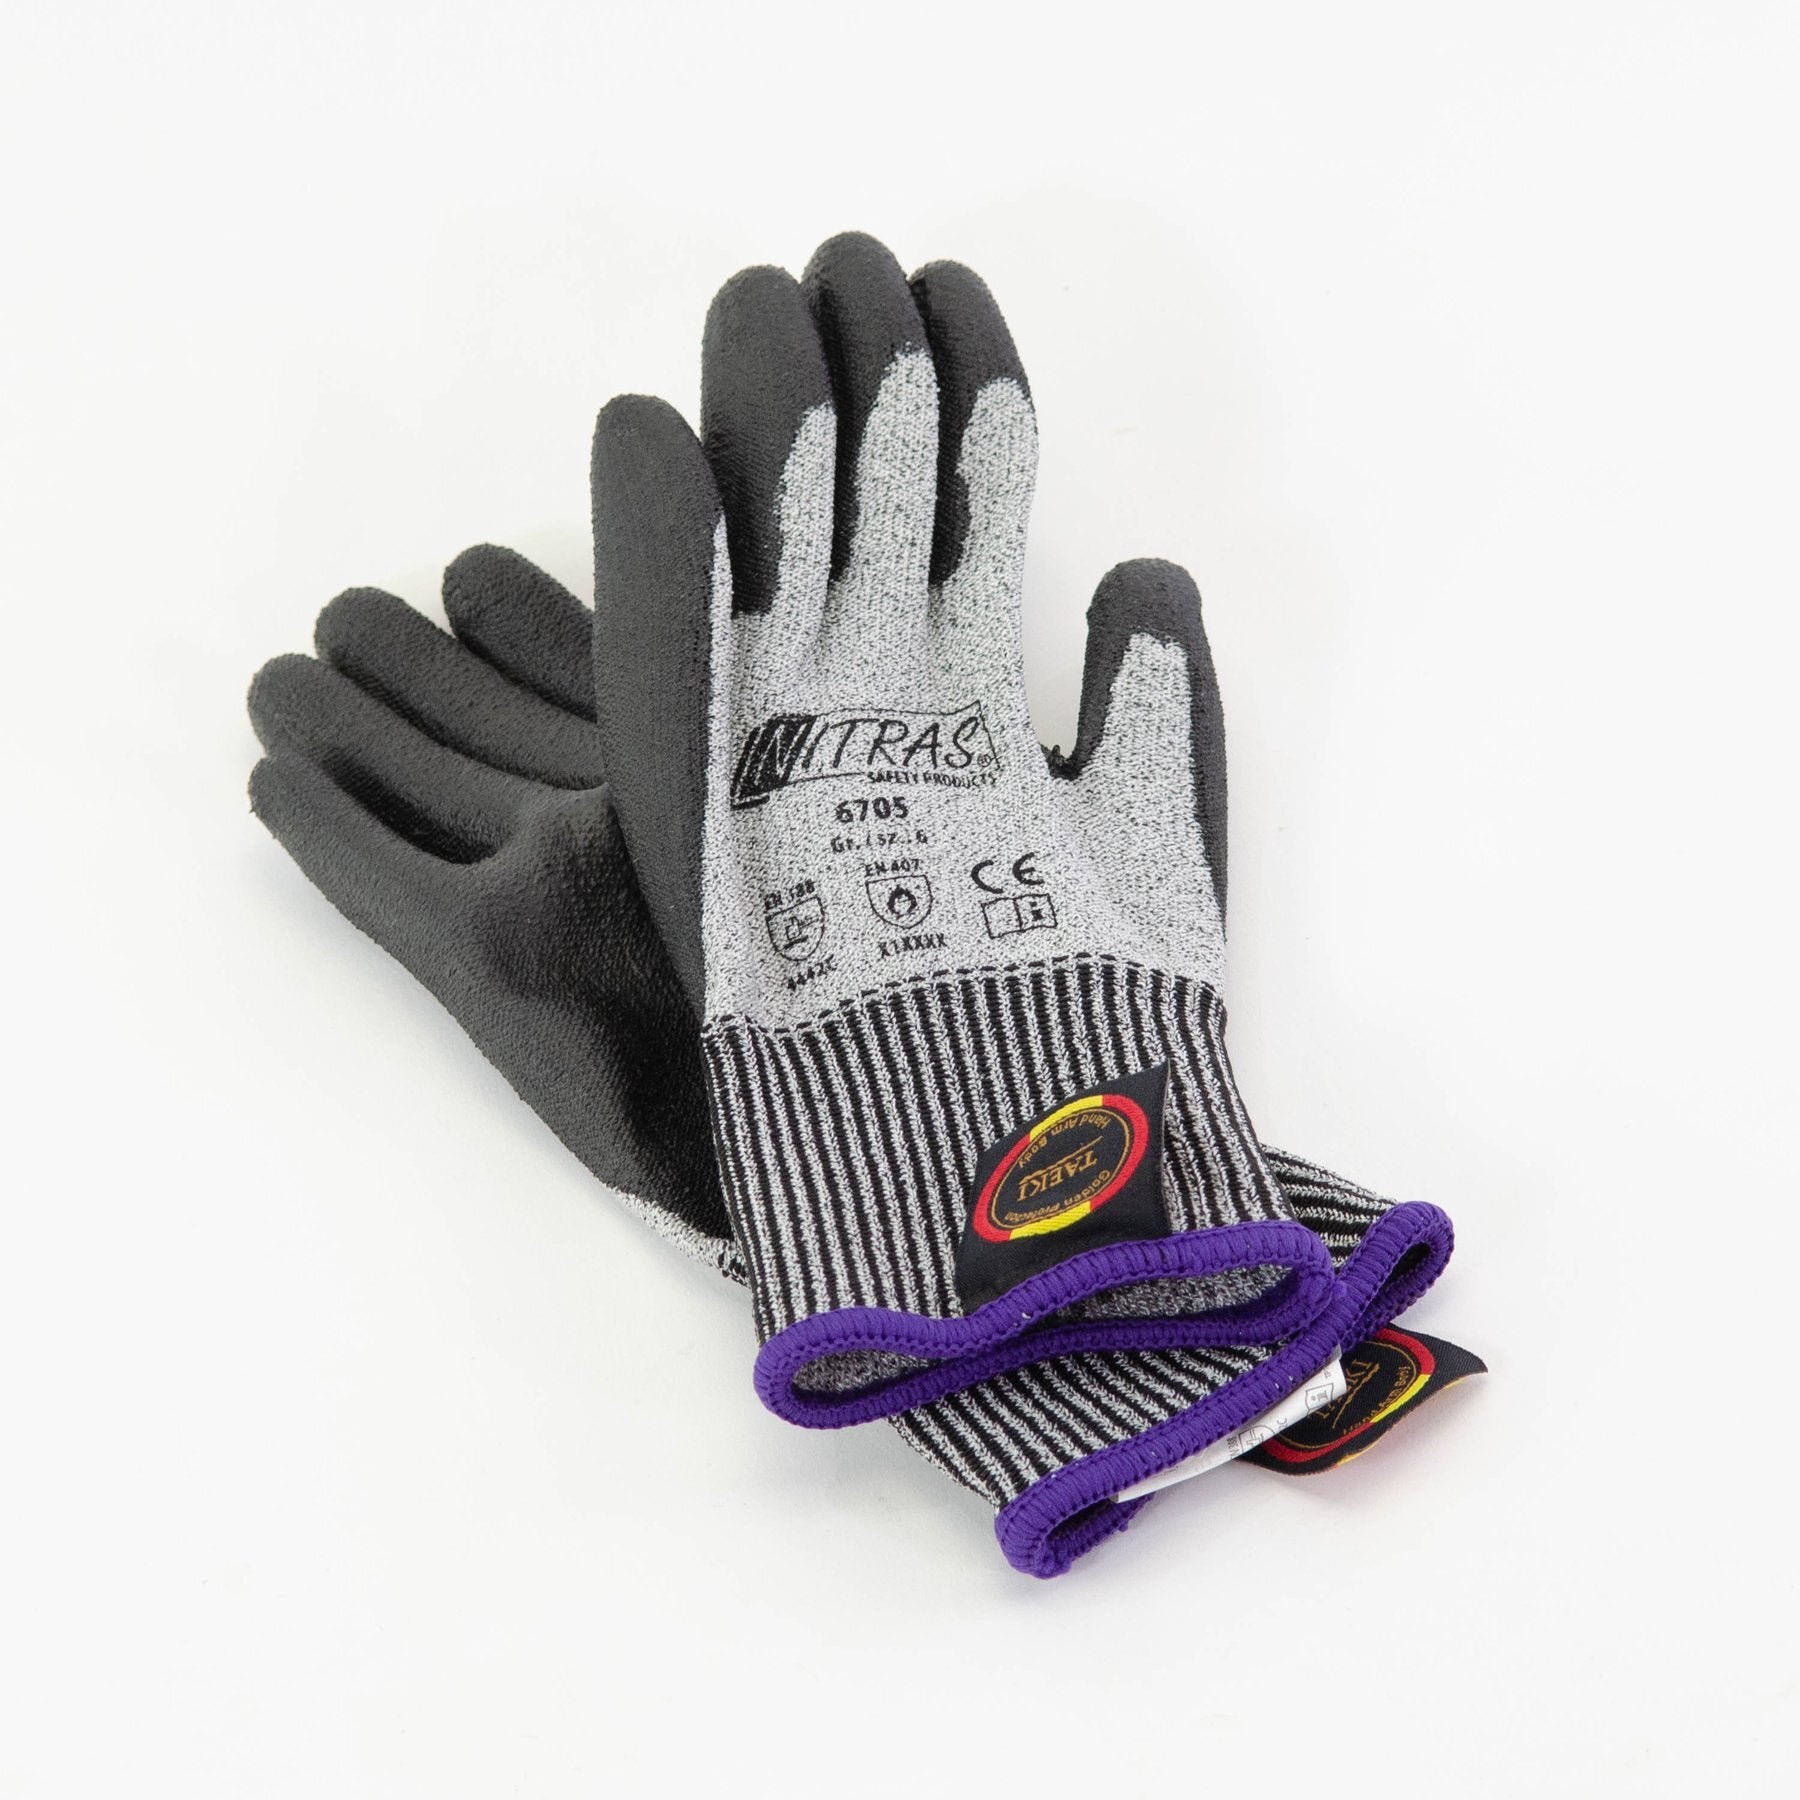 Zorfeter Cut Resistant Gloves for Kids